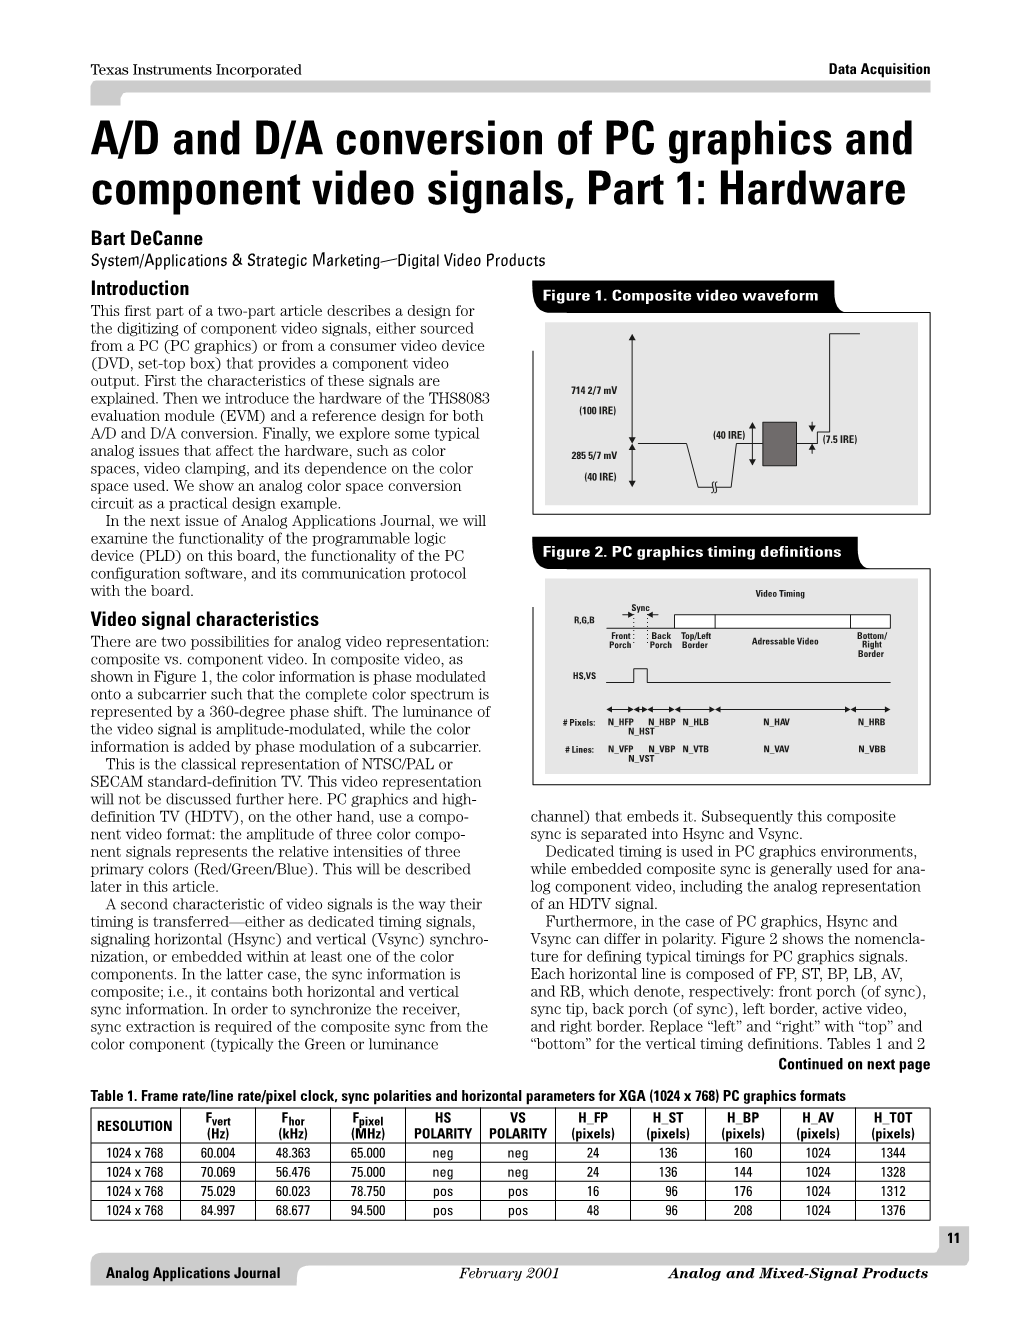 A/D and D/A Conversion of PC Graphics and Component Video Signals, Part 1: Hardware Bart Decanne System/Applications & Strategic Marketing—Digital Video Products